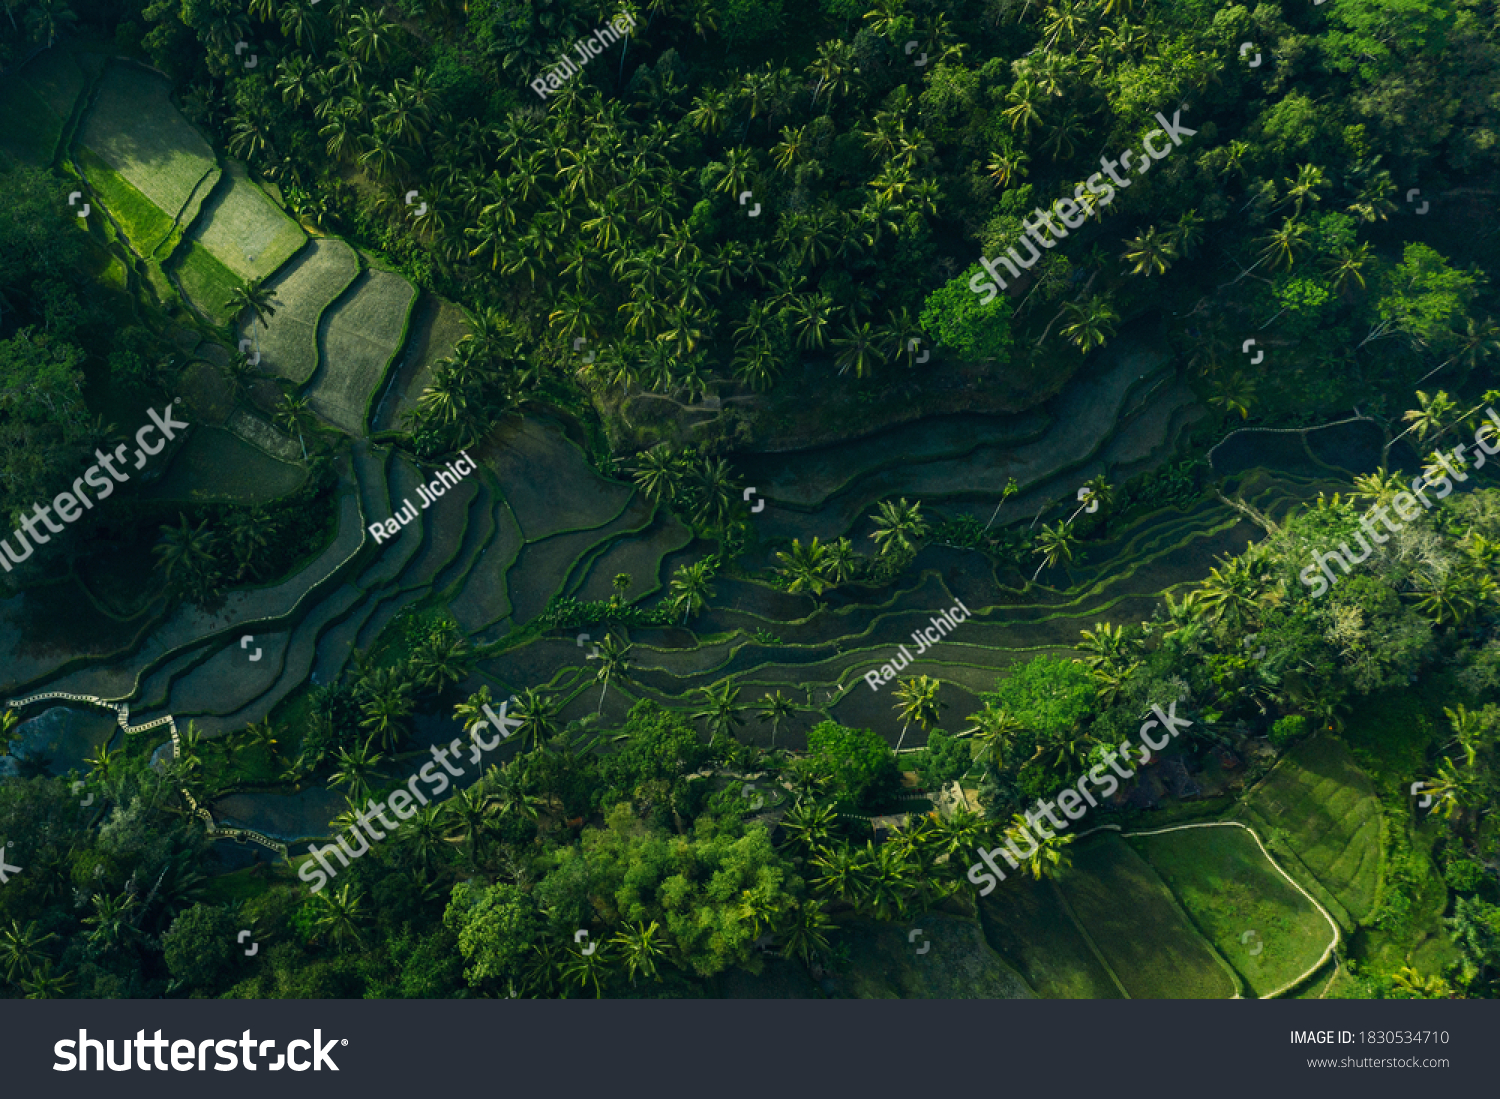 Aerial view of Tegalalang Bali rice terraces. Abstract geometric shapes of agricultural parcels in green color. Drone photo directly above field. #1830534710